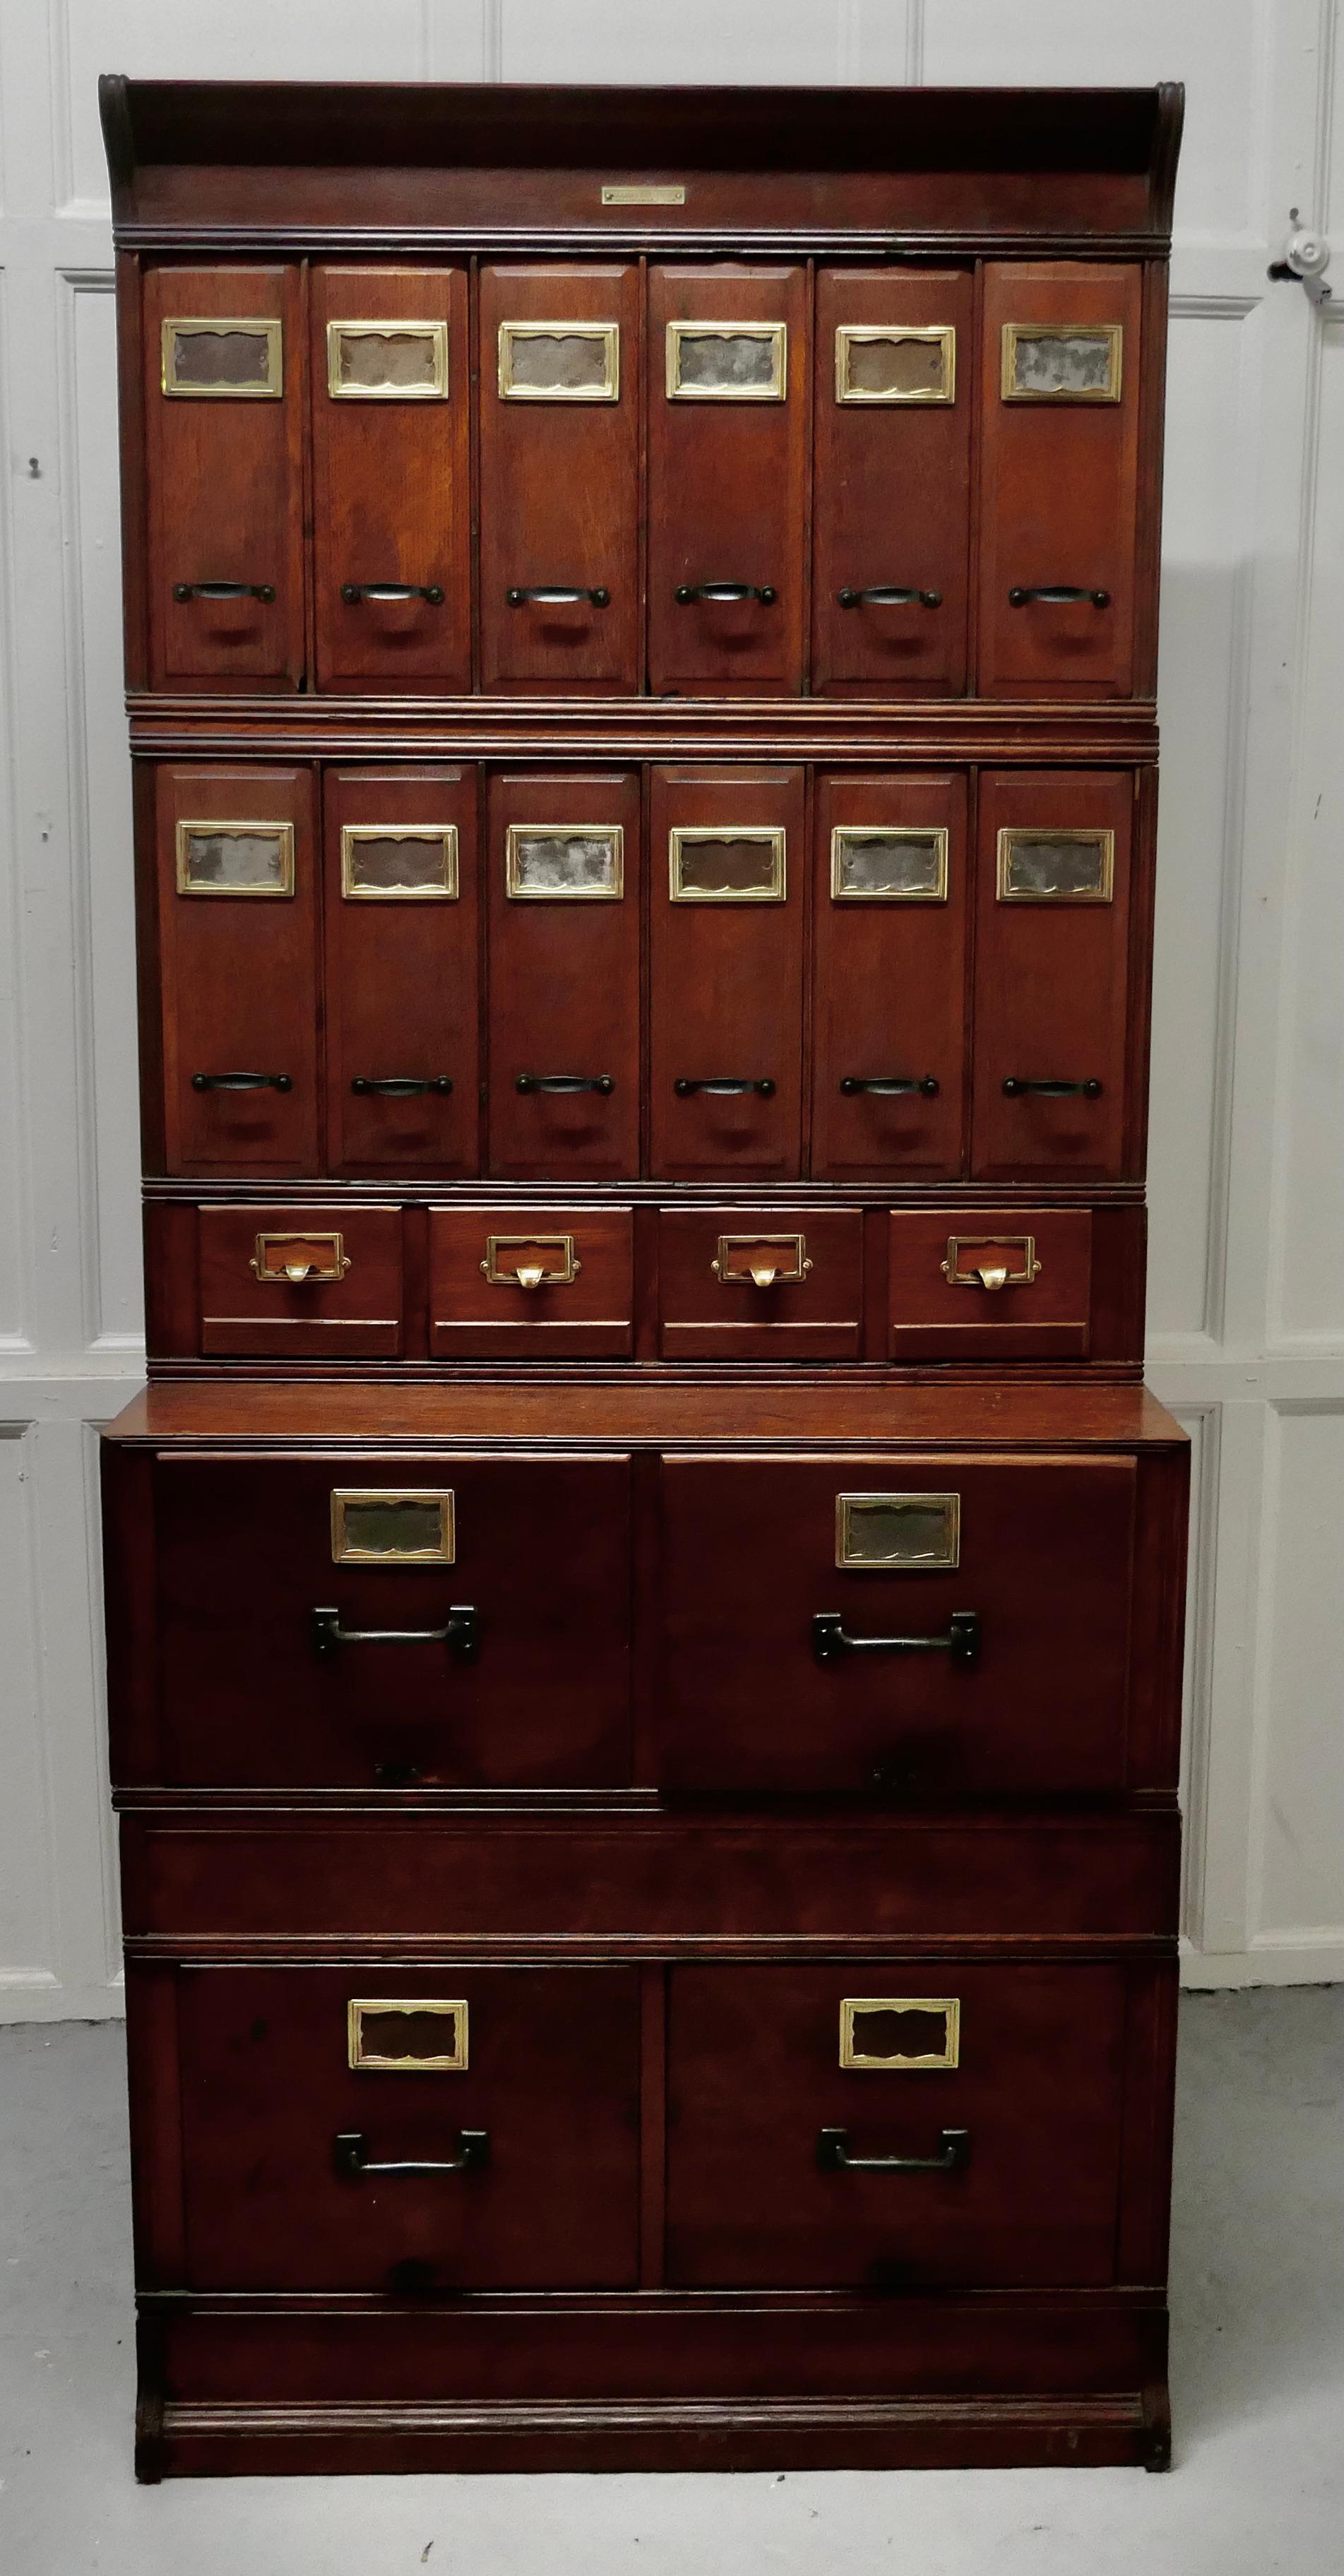 Superb American Stacking Filing Cabinet by Yawman and Erbe 

This is a superb Example of an American Stacking System Waterfall Filing Cabinet, this handsome and unusual piece, dates from around 1900, it is made in Oak with varying sizes of drawers